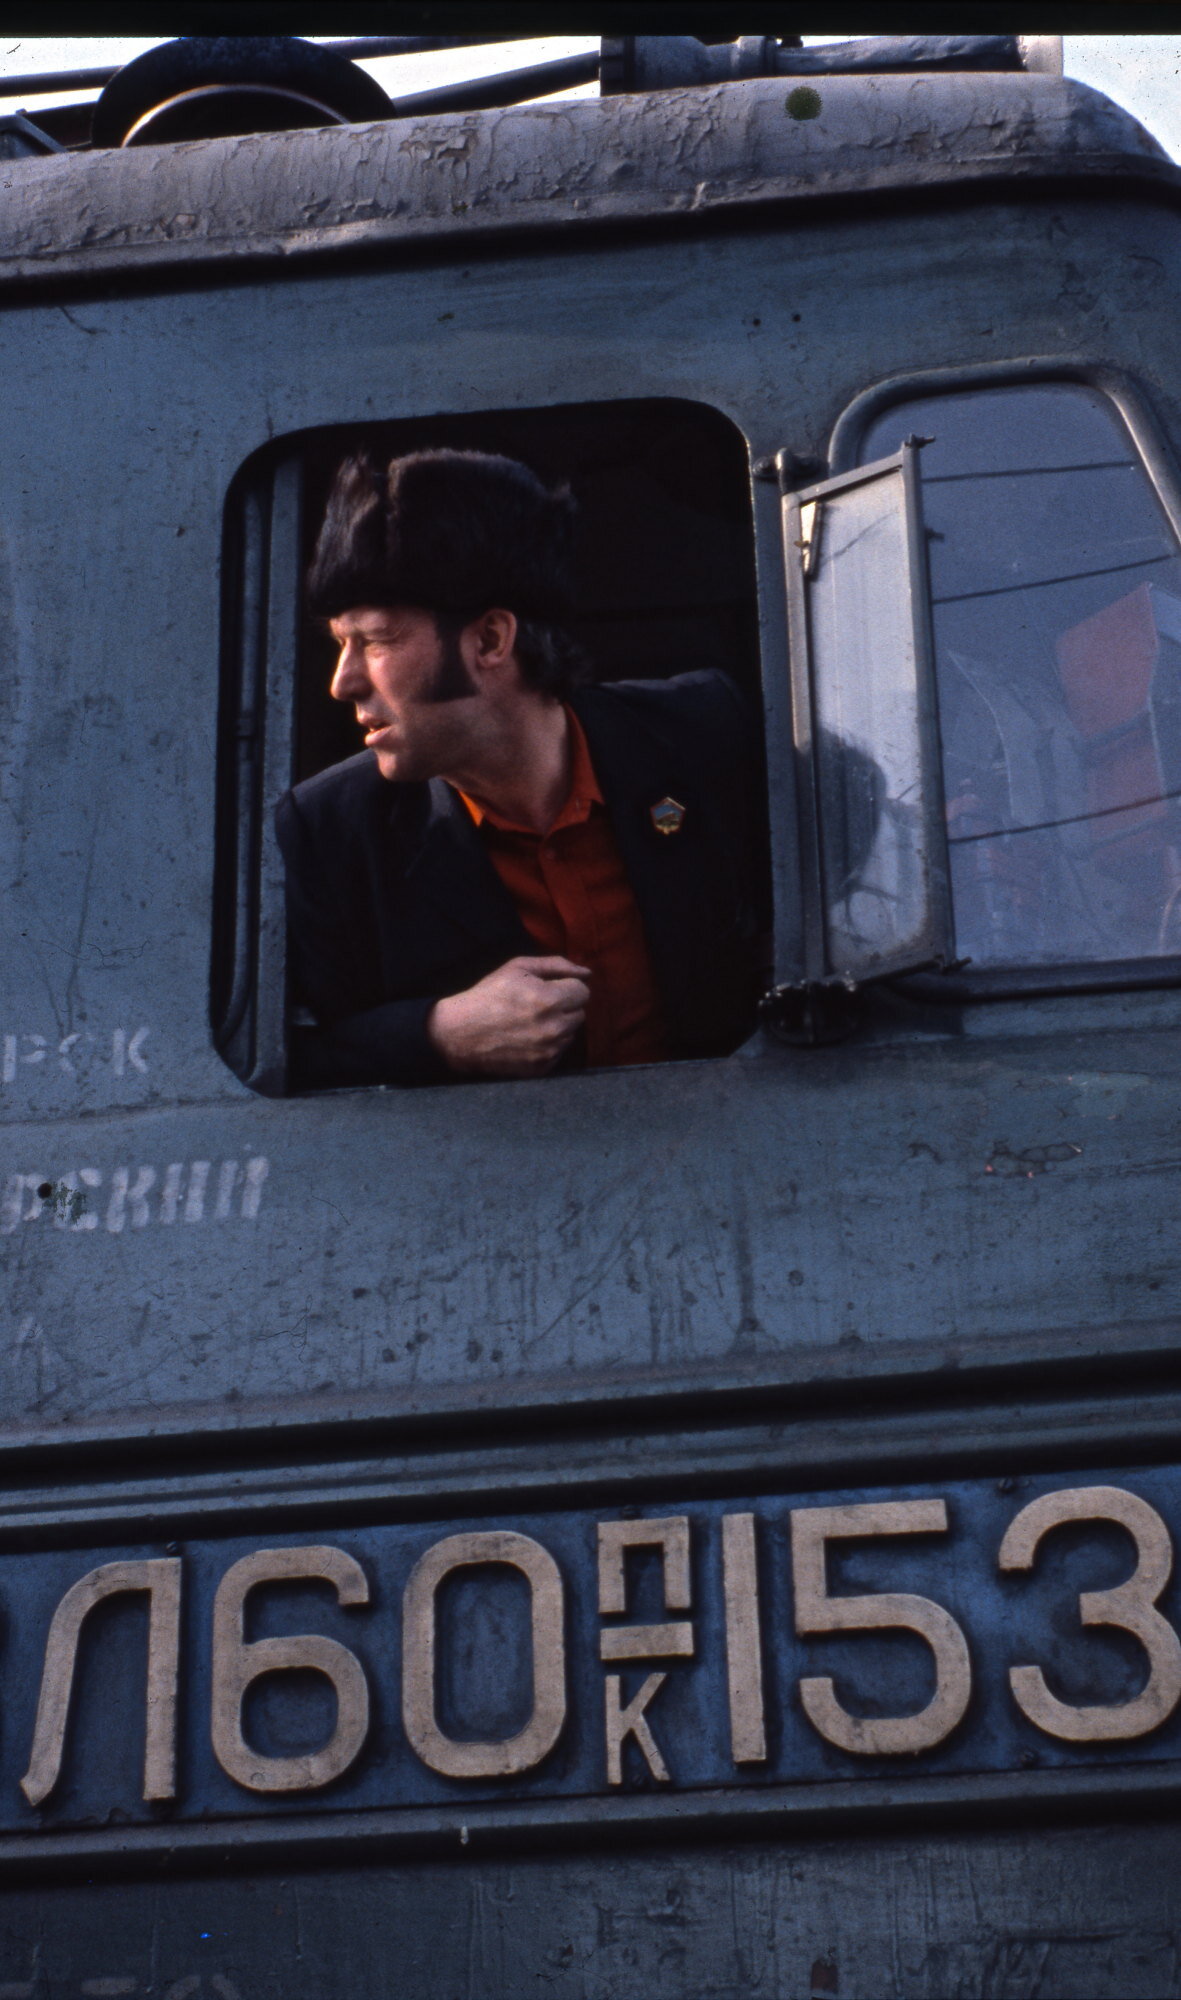 The driver of a Trans-siberian train. The trip from either Vladivistok or Beijing to Moscow takes four days with lots of birch trees for scenery and and an increasing longing for good food. Russia.